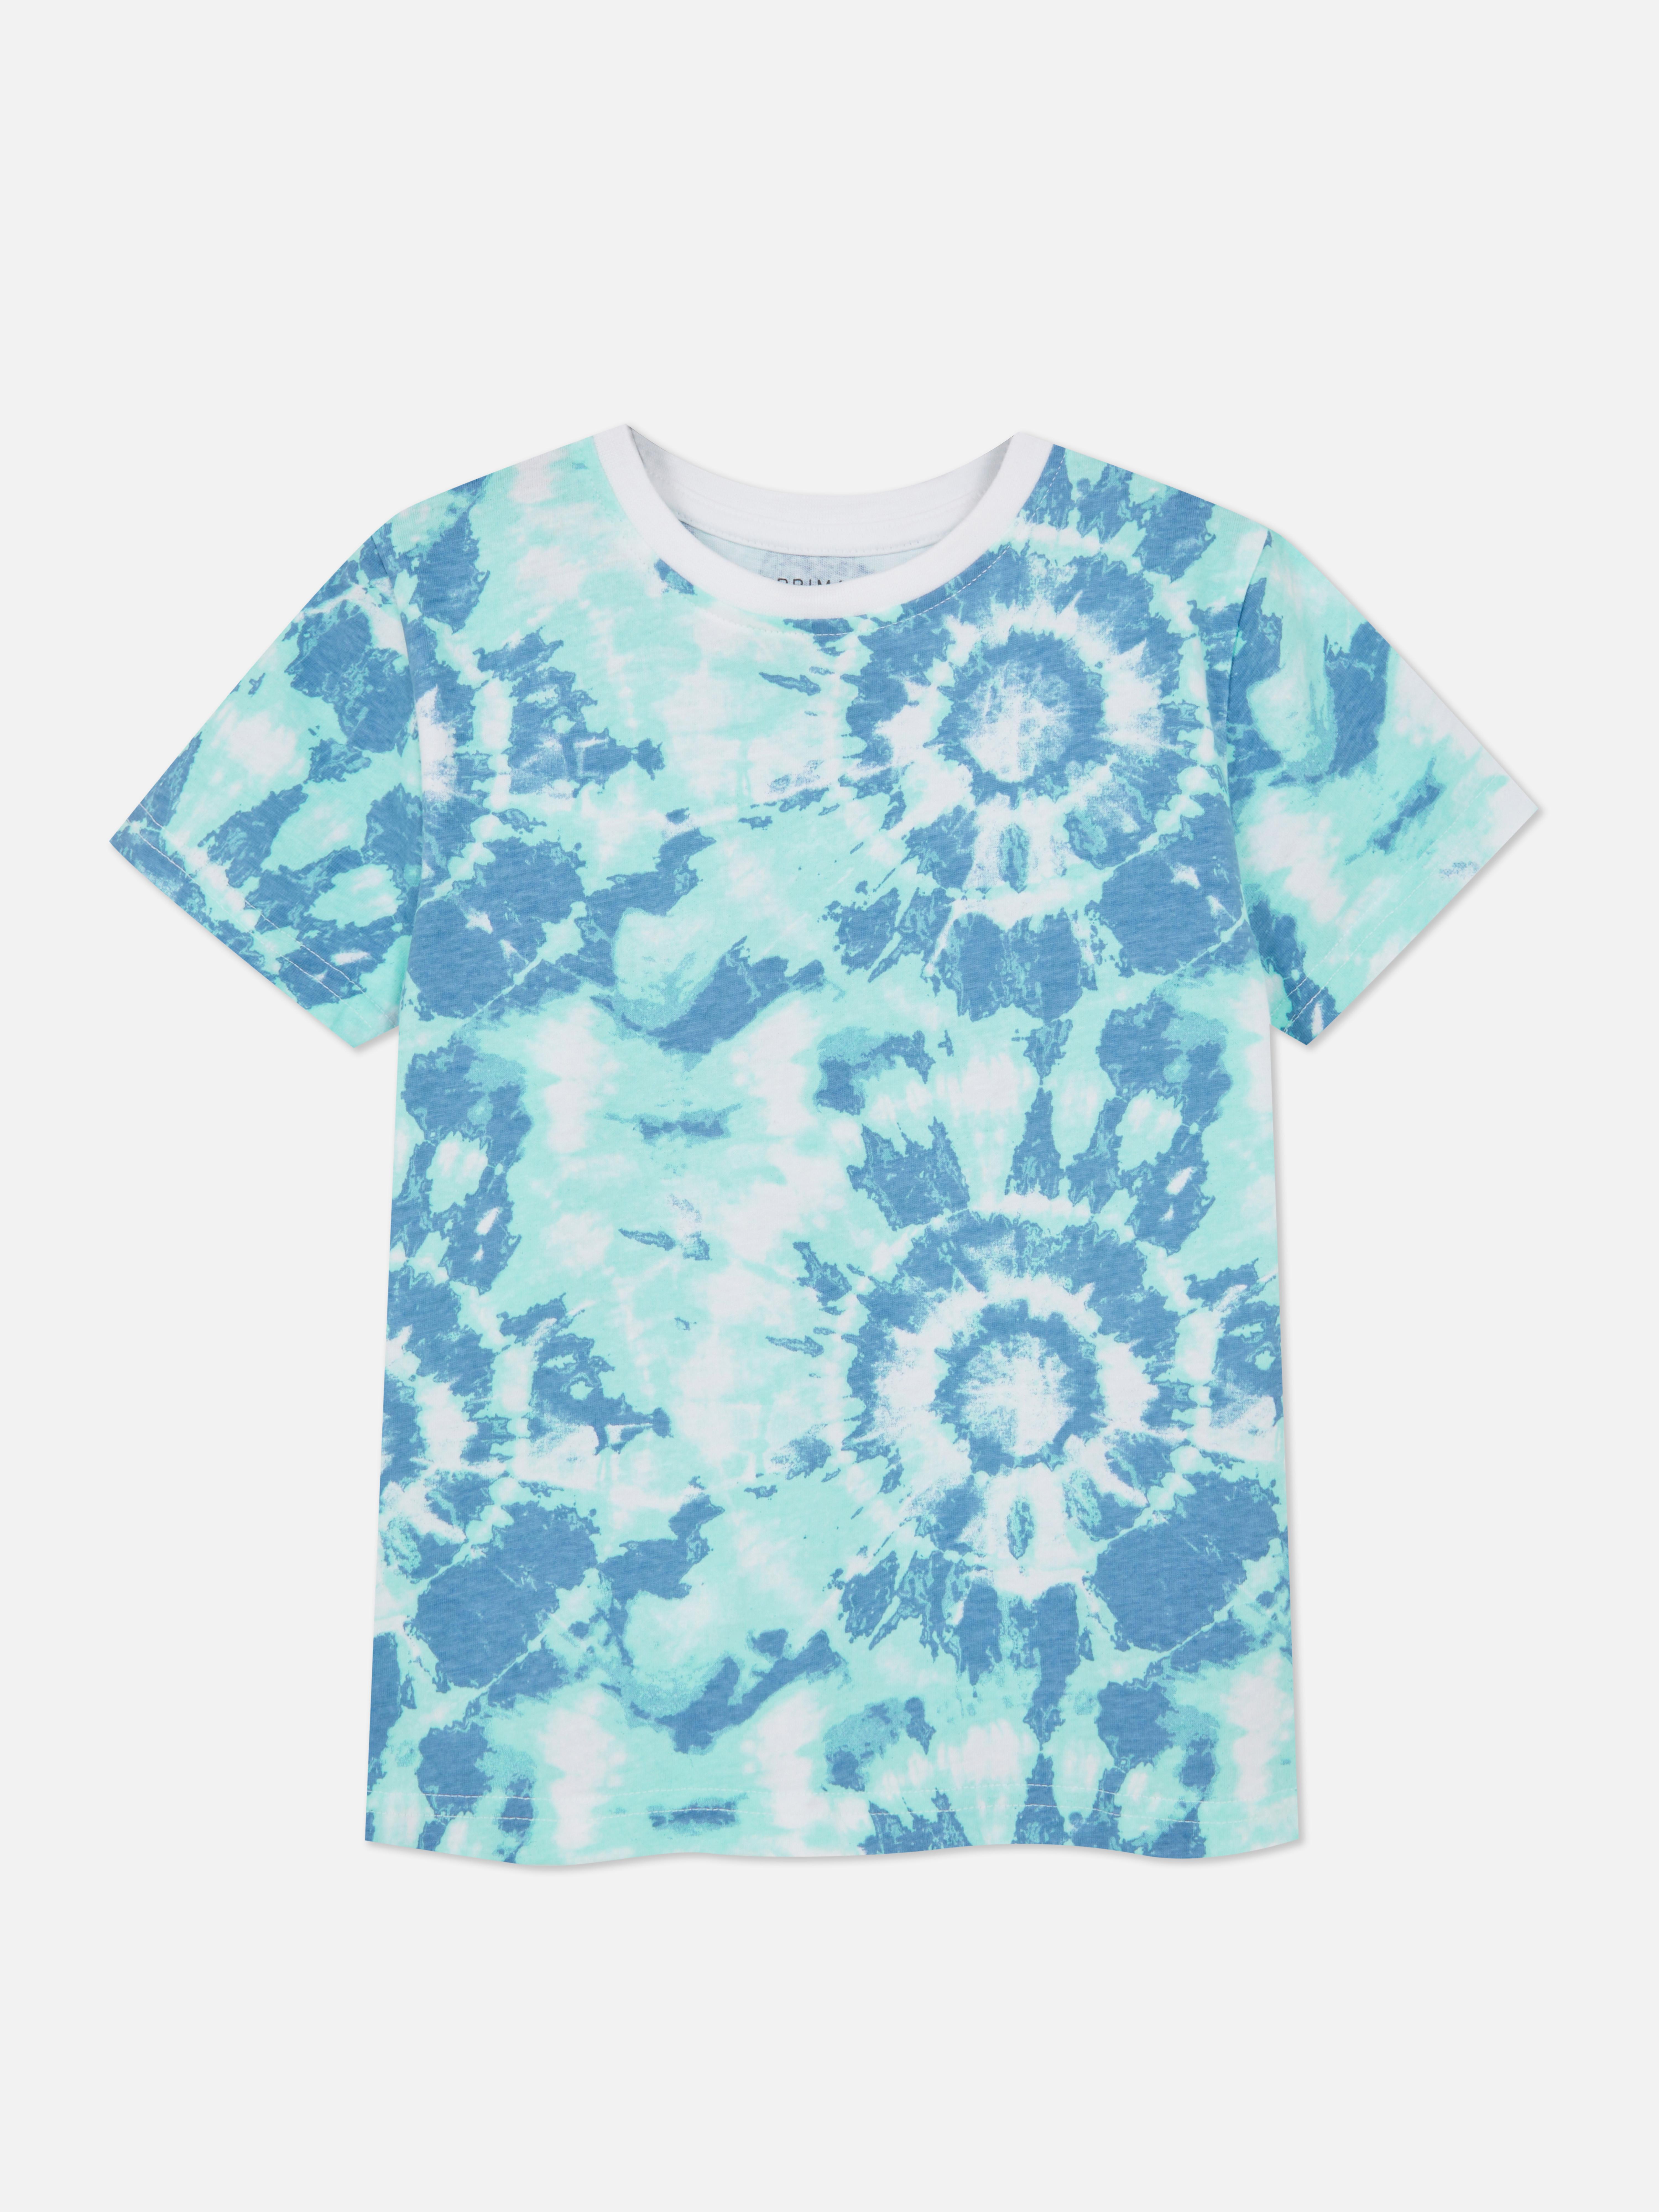 Tie-Dye Cut and Sew T-shirt